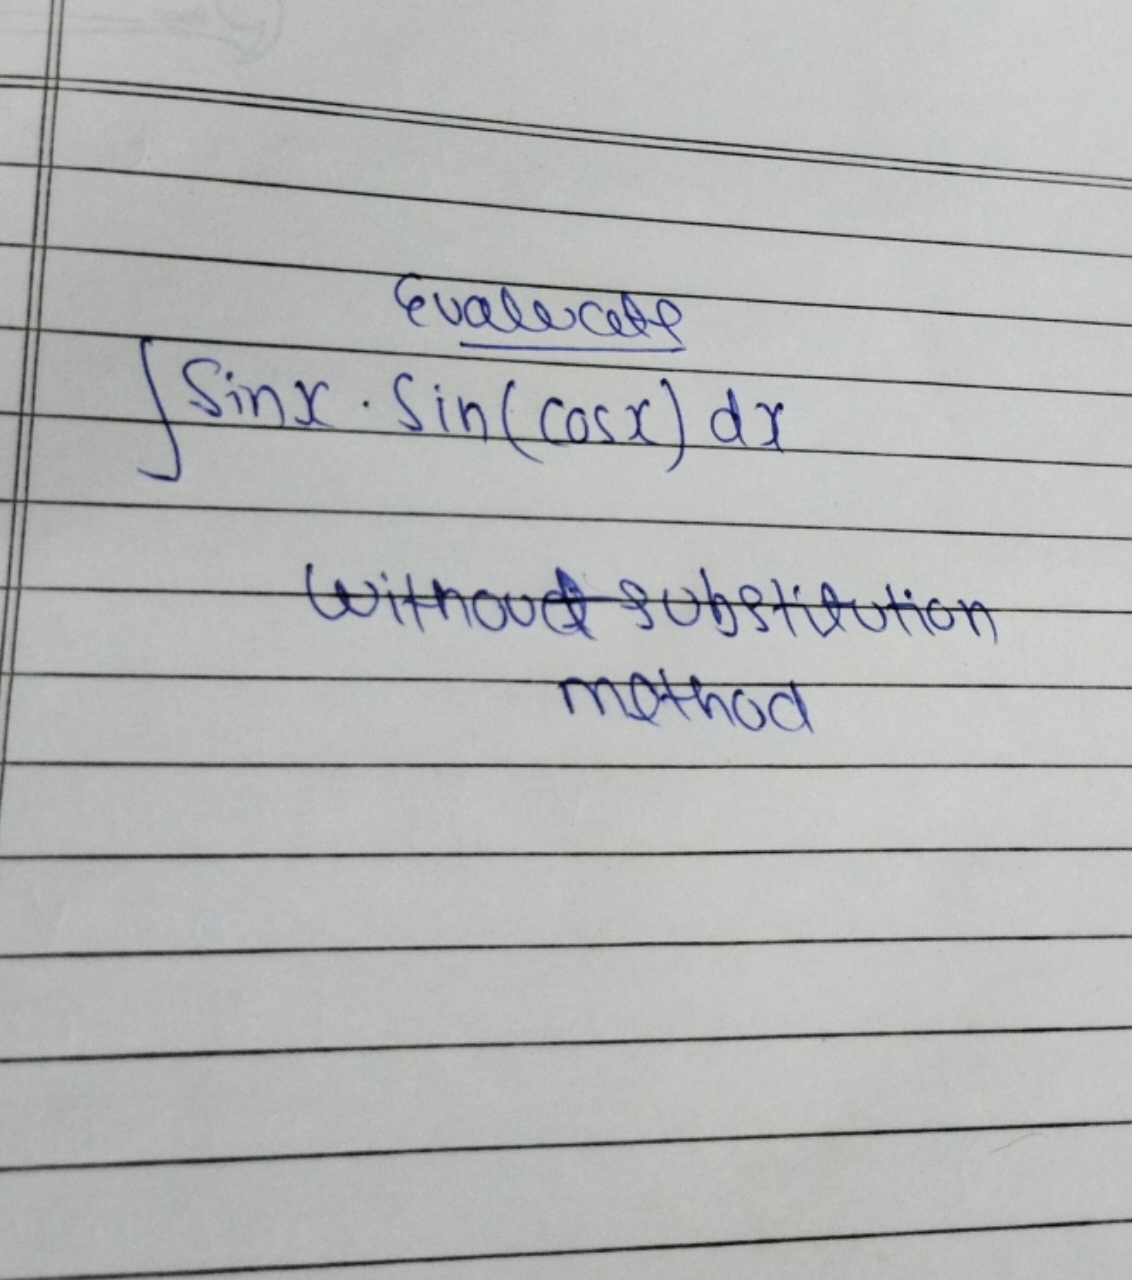 Evaluate
∫sinx⋅sin(cosx)dx
Without substitution method
